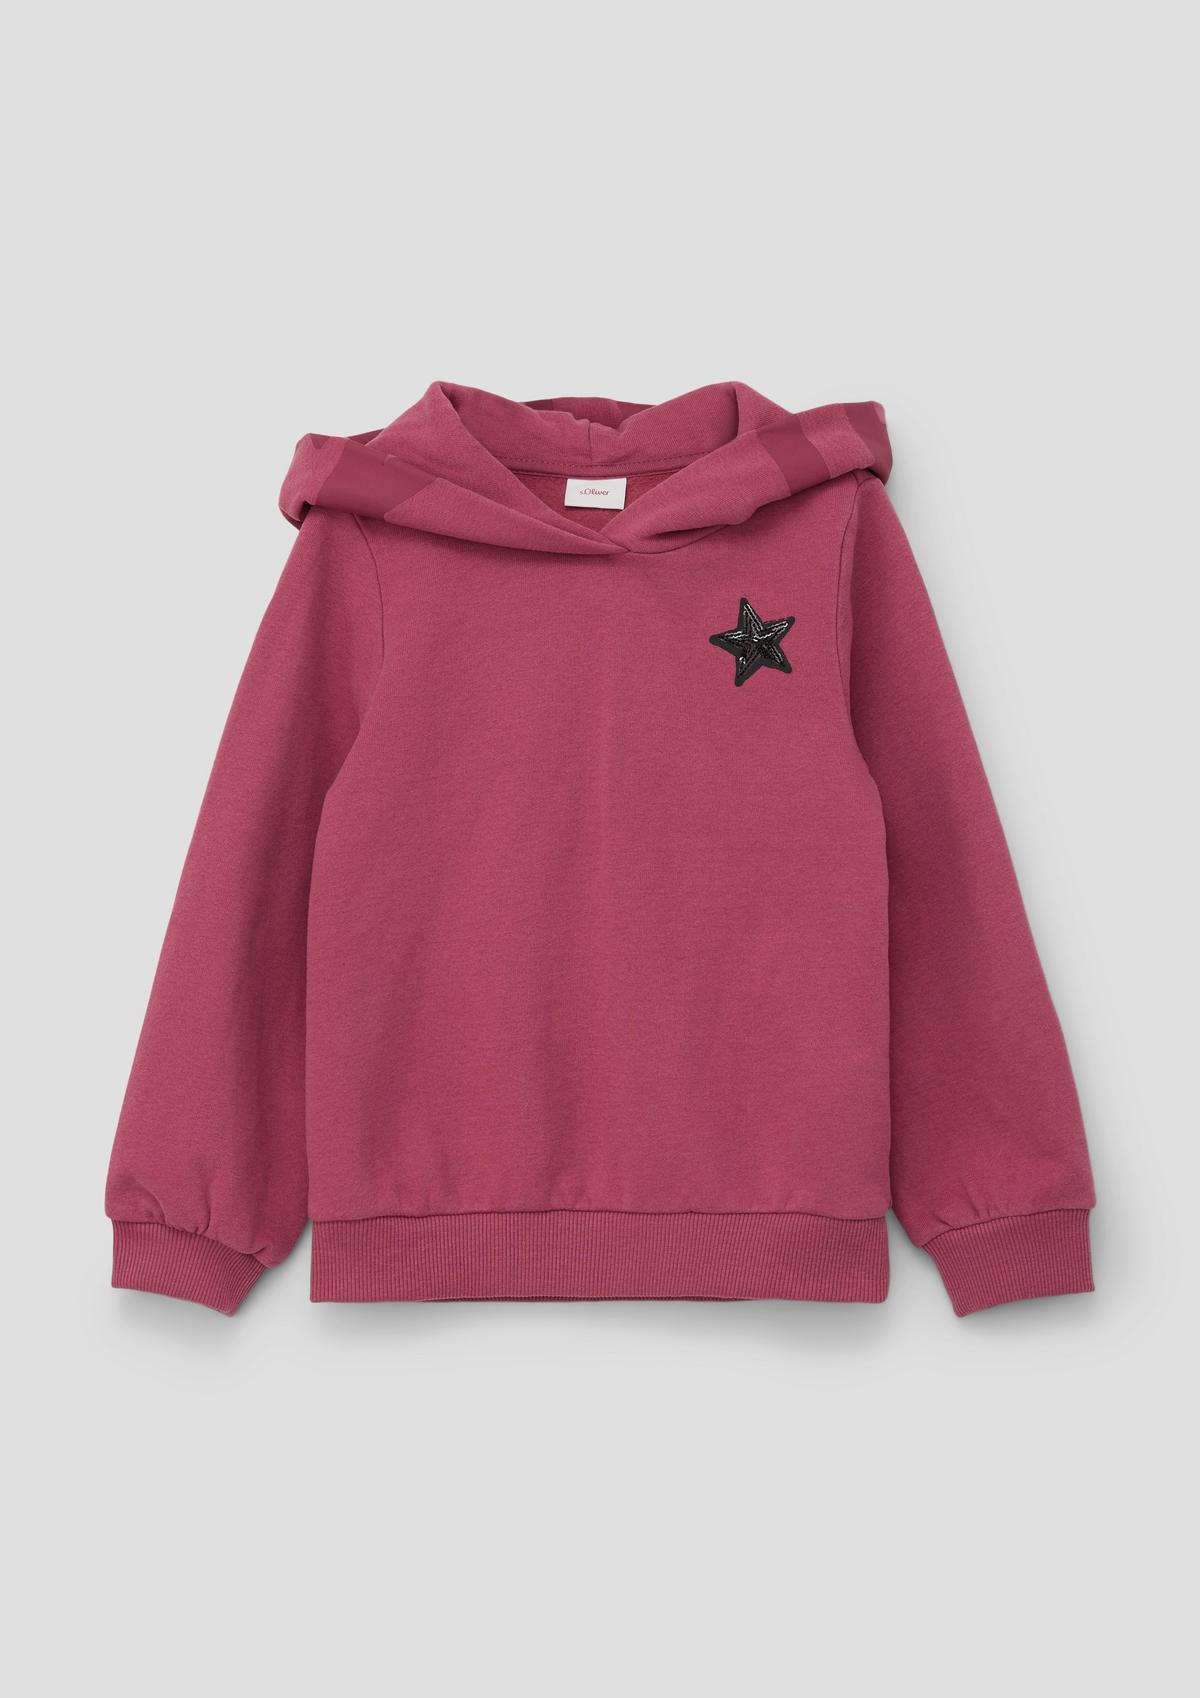 s.Oliver Sweatshirt with a sequin detail